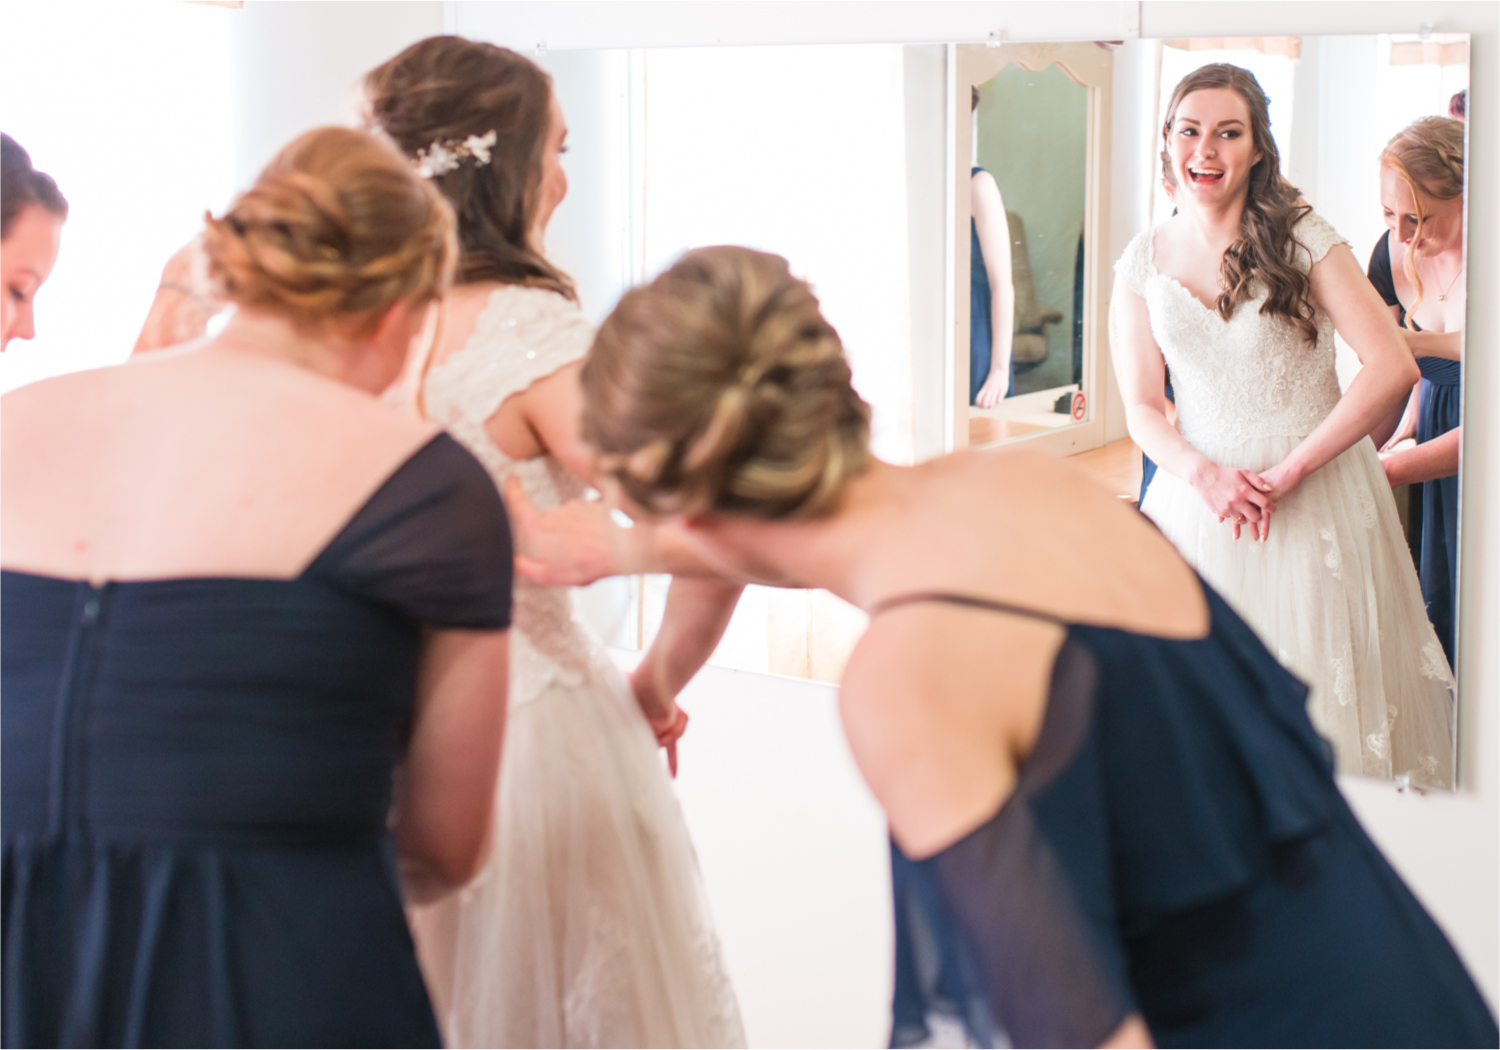 Summer Ellis Ranch Wedding in Loveland Colorado | Britni Girard Photography | Wedding Photo and Video Team | Bride hair Dondi AtWow from Sola Salon in Loveland | Getting Ready Suite